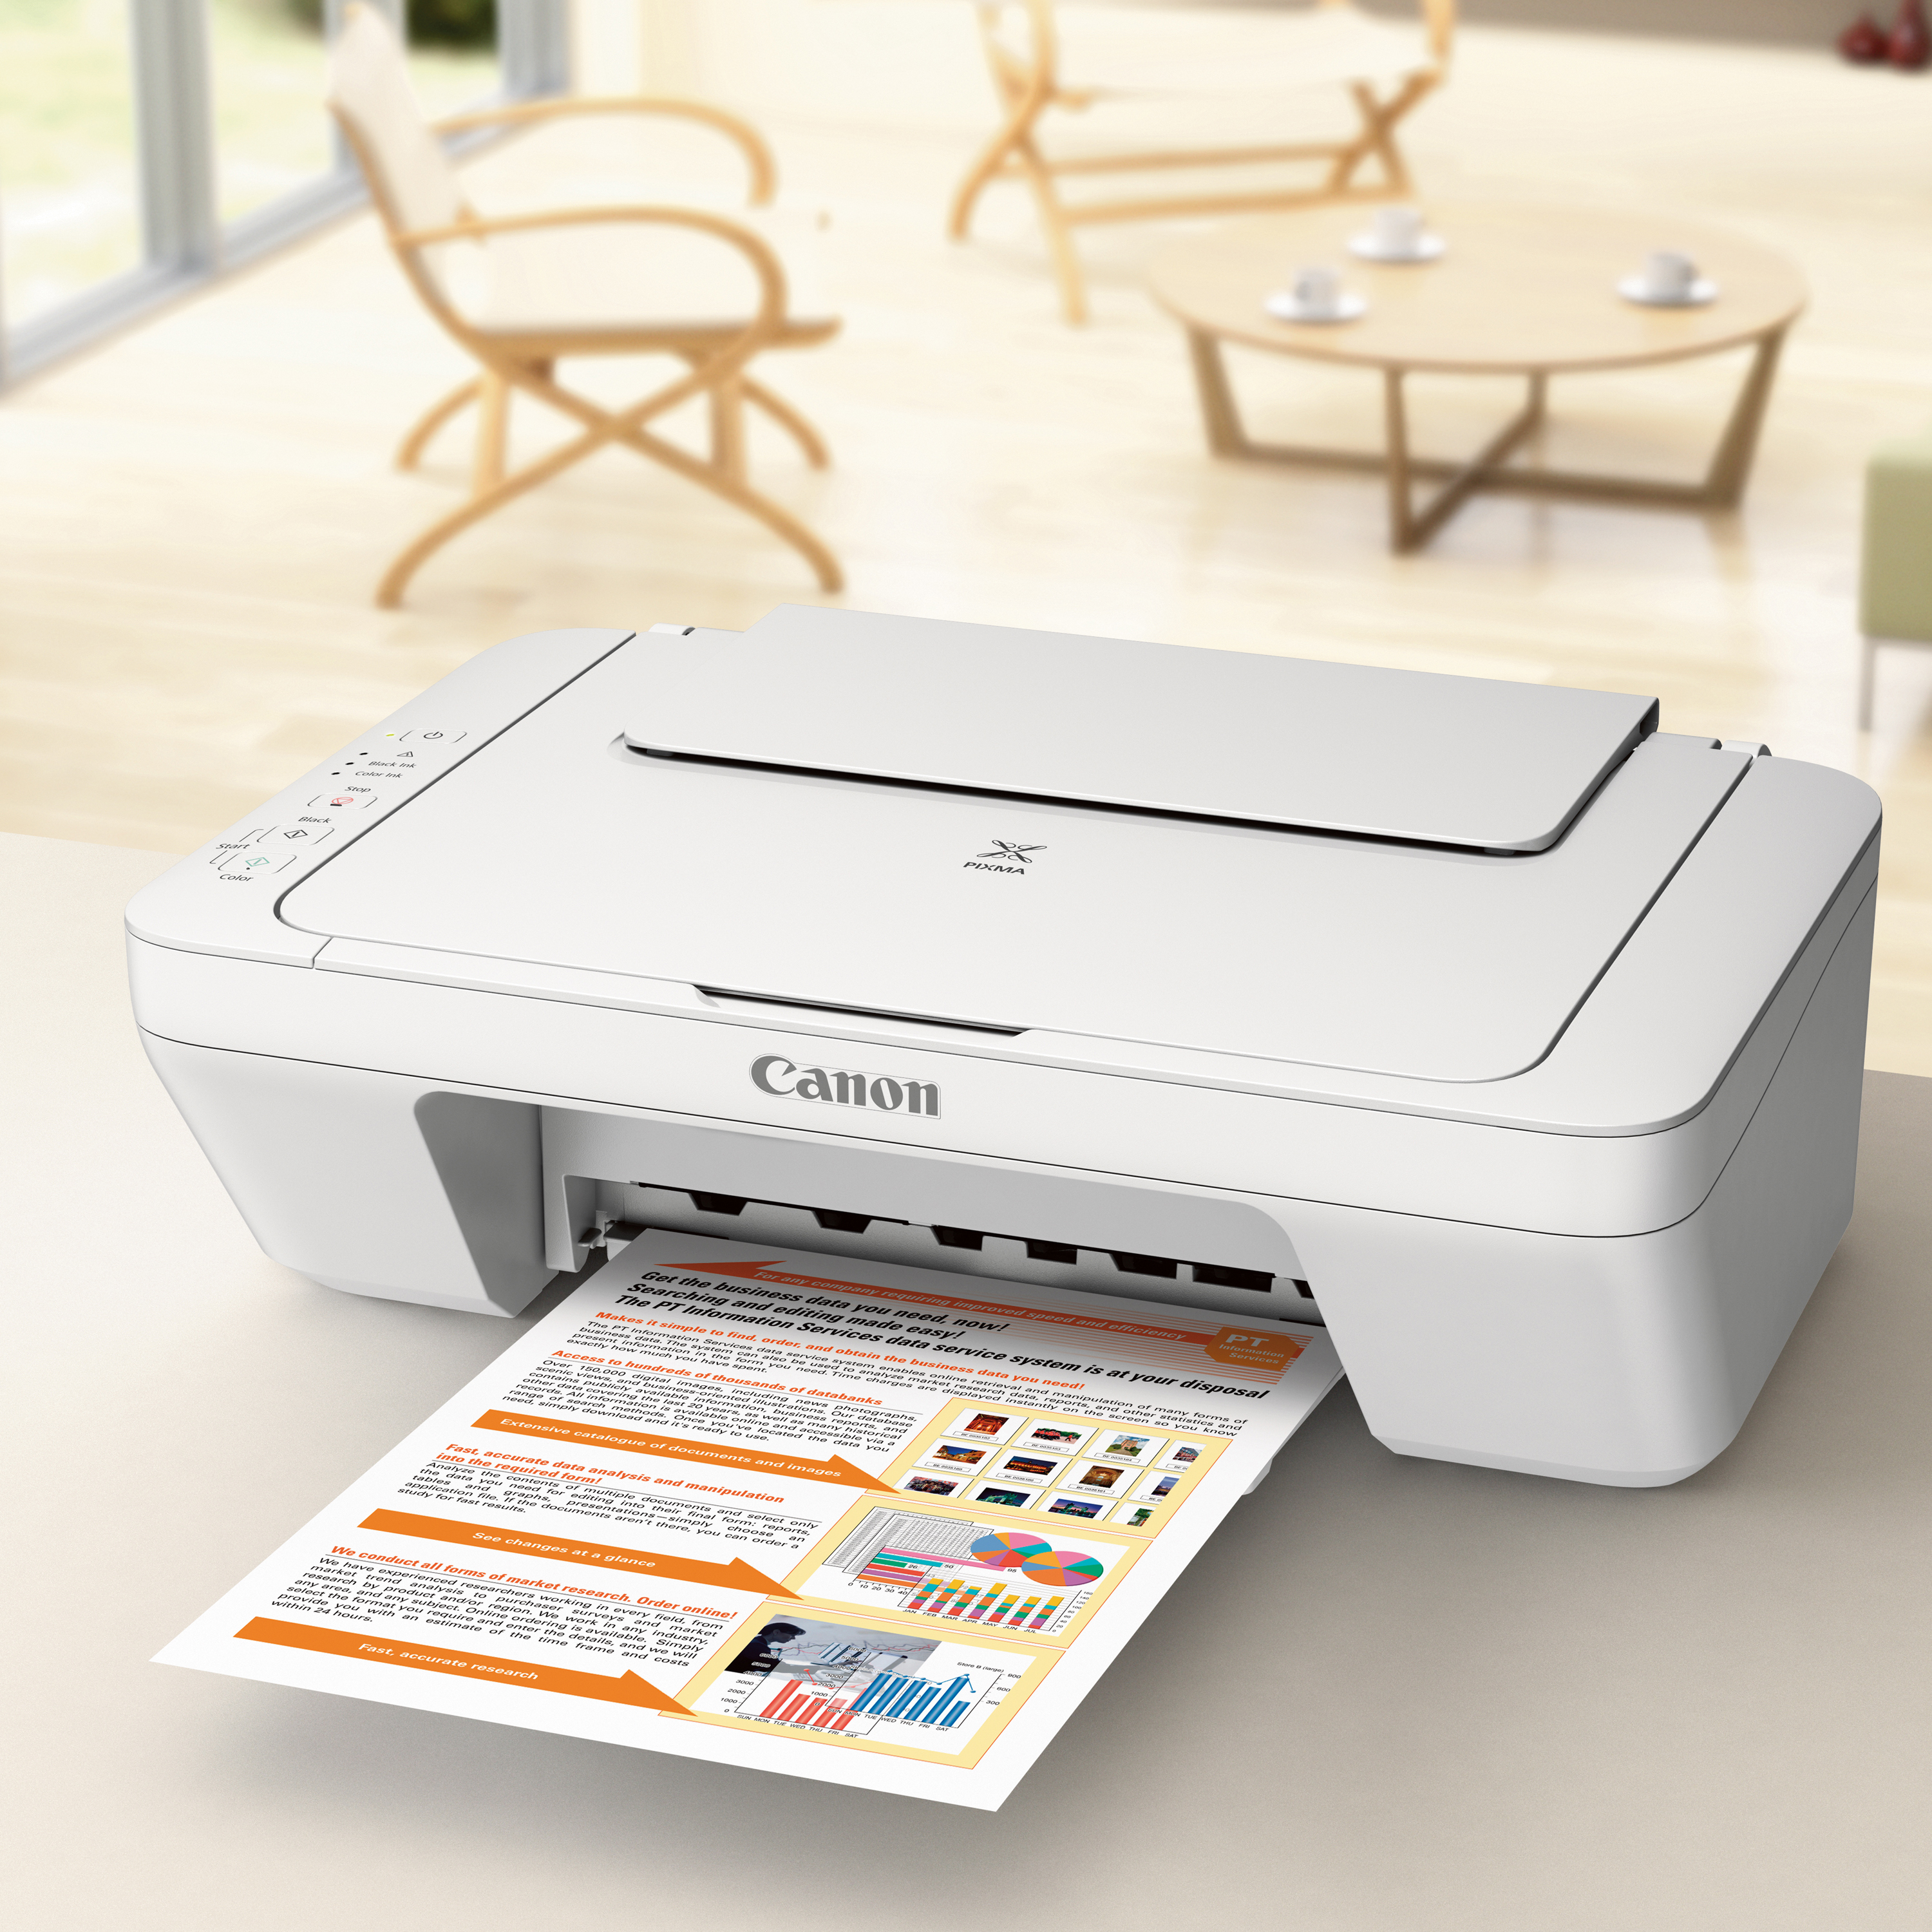 Canon PIXMA MG2522 Wired All-in-One Color Inkjet Printer [USB Cable Included], White - image 3 of 6